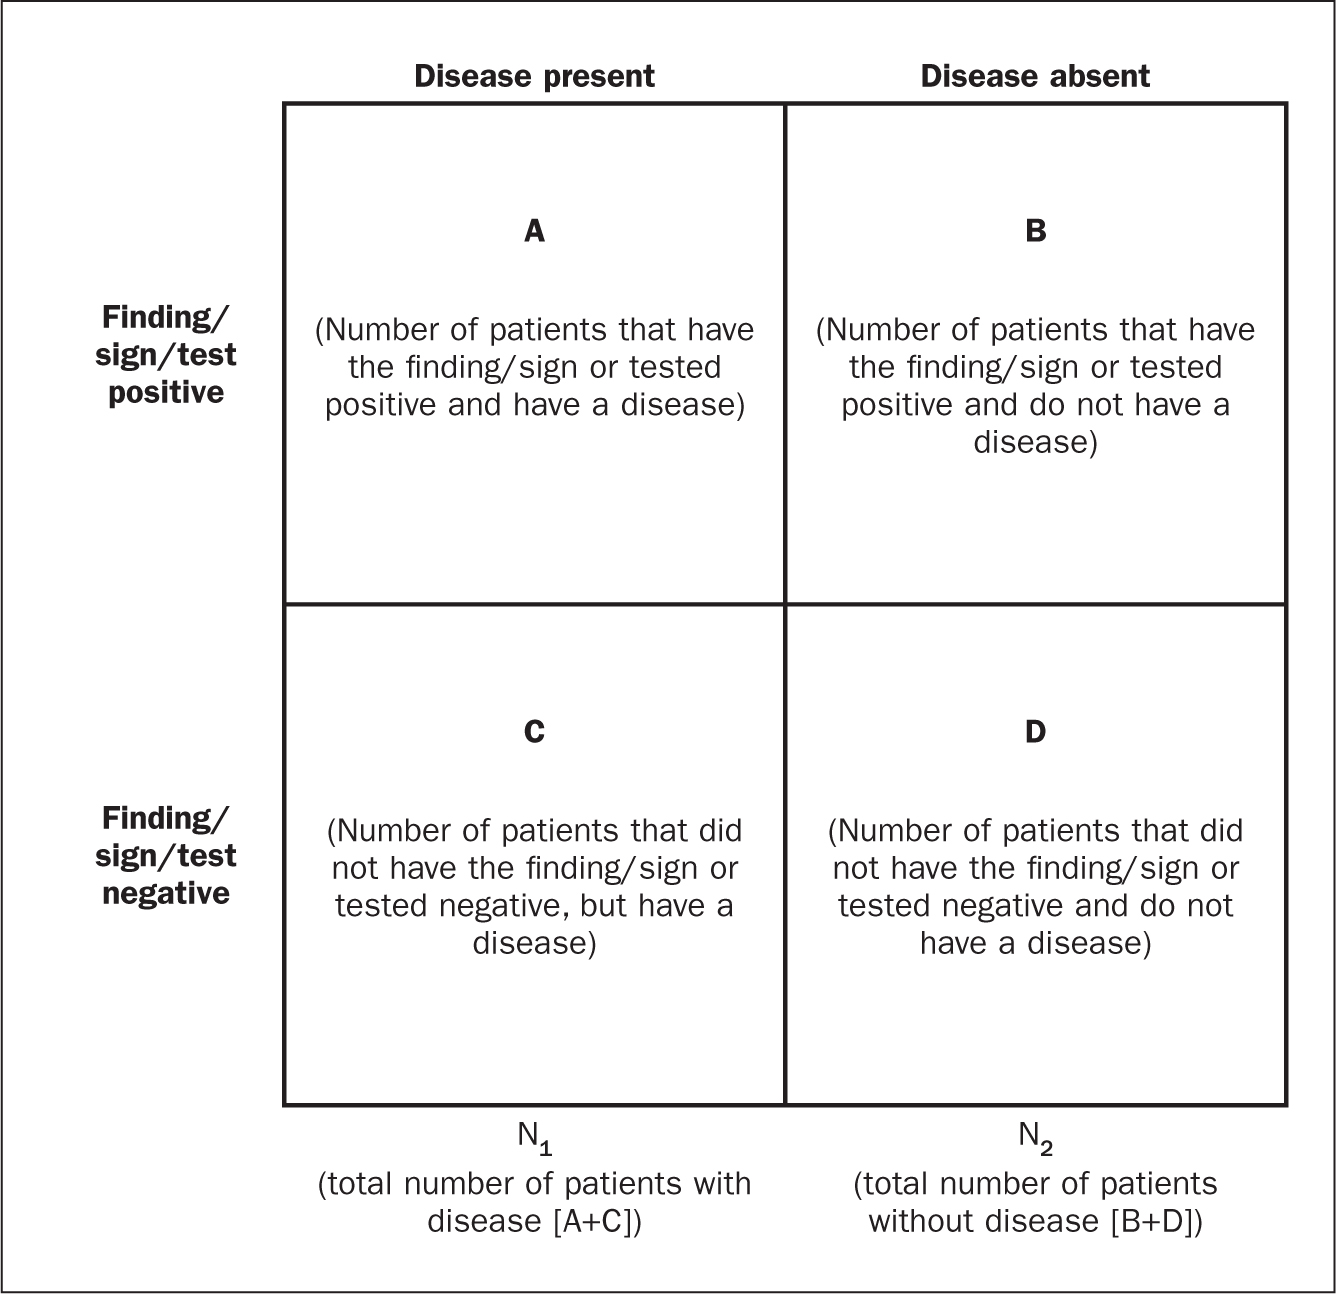 critical thinking and clinical reasoning map